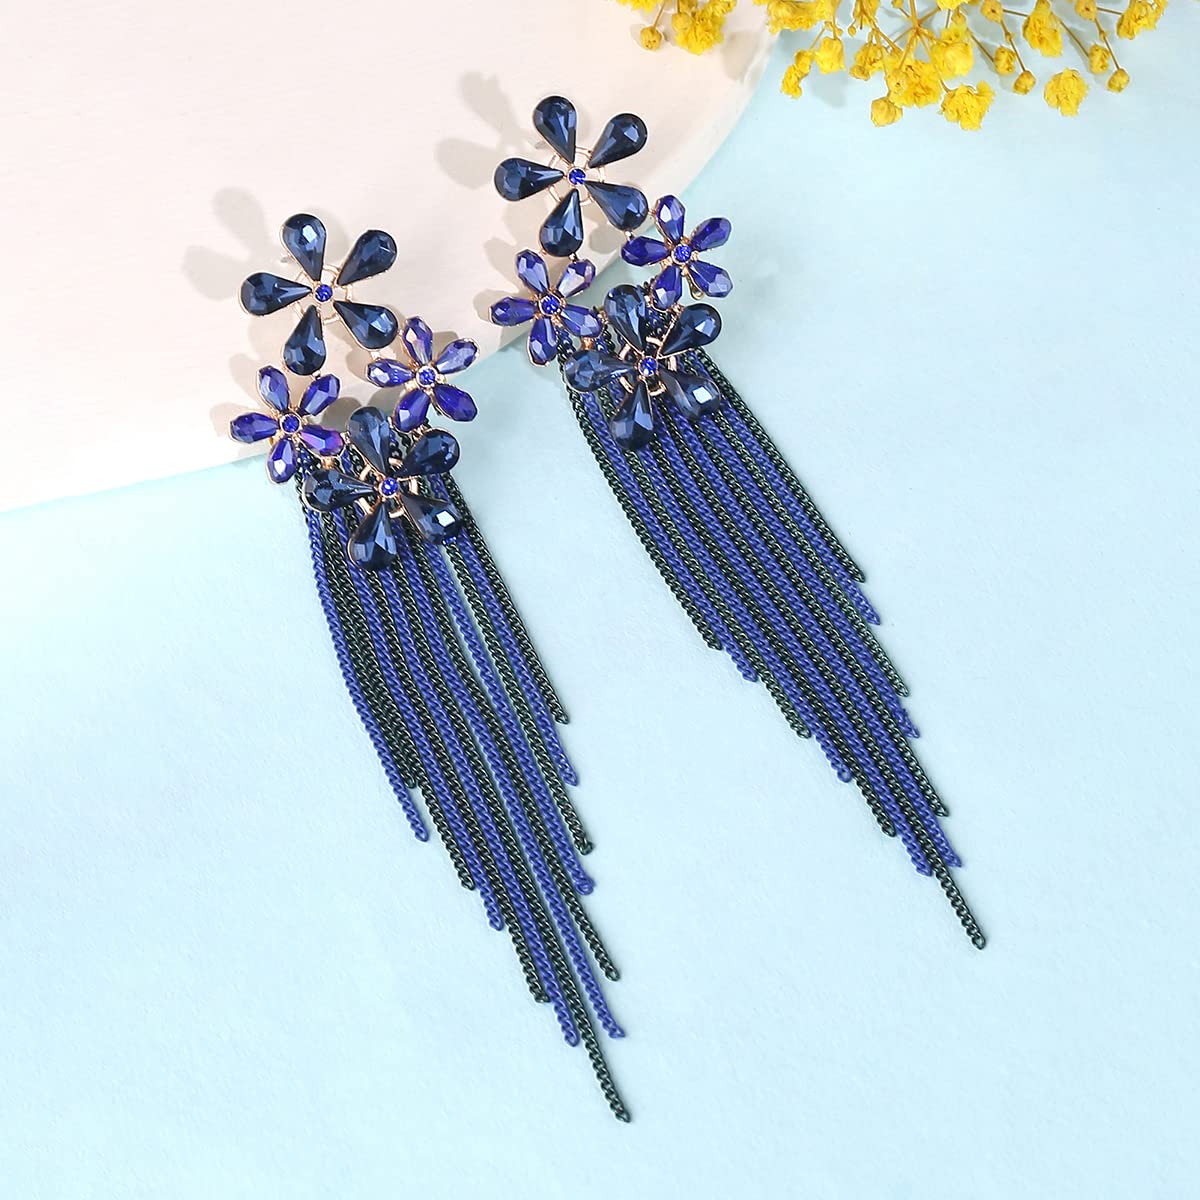 Yellow Chimes Crystal Danglers Earrings for Women Floral Shaped Crystal Blue Long Chain Dangler Earrings for Women and Girls